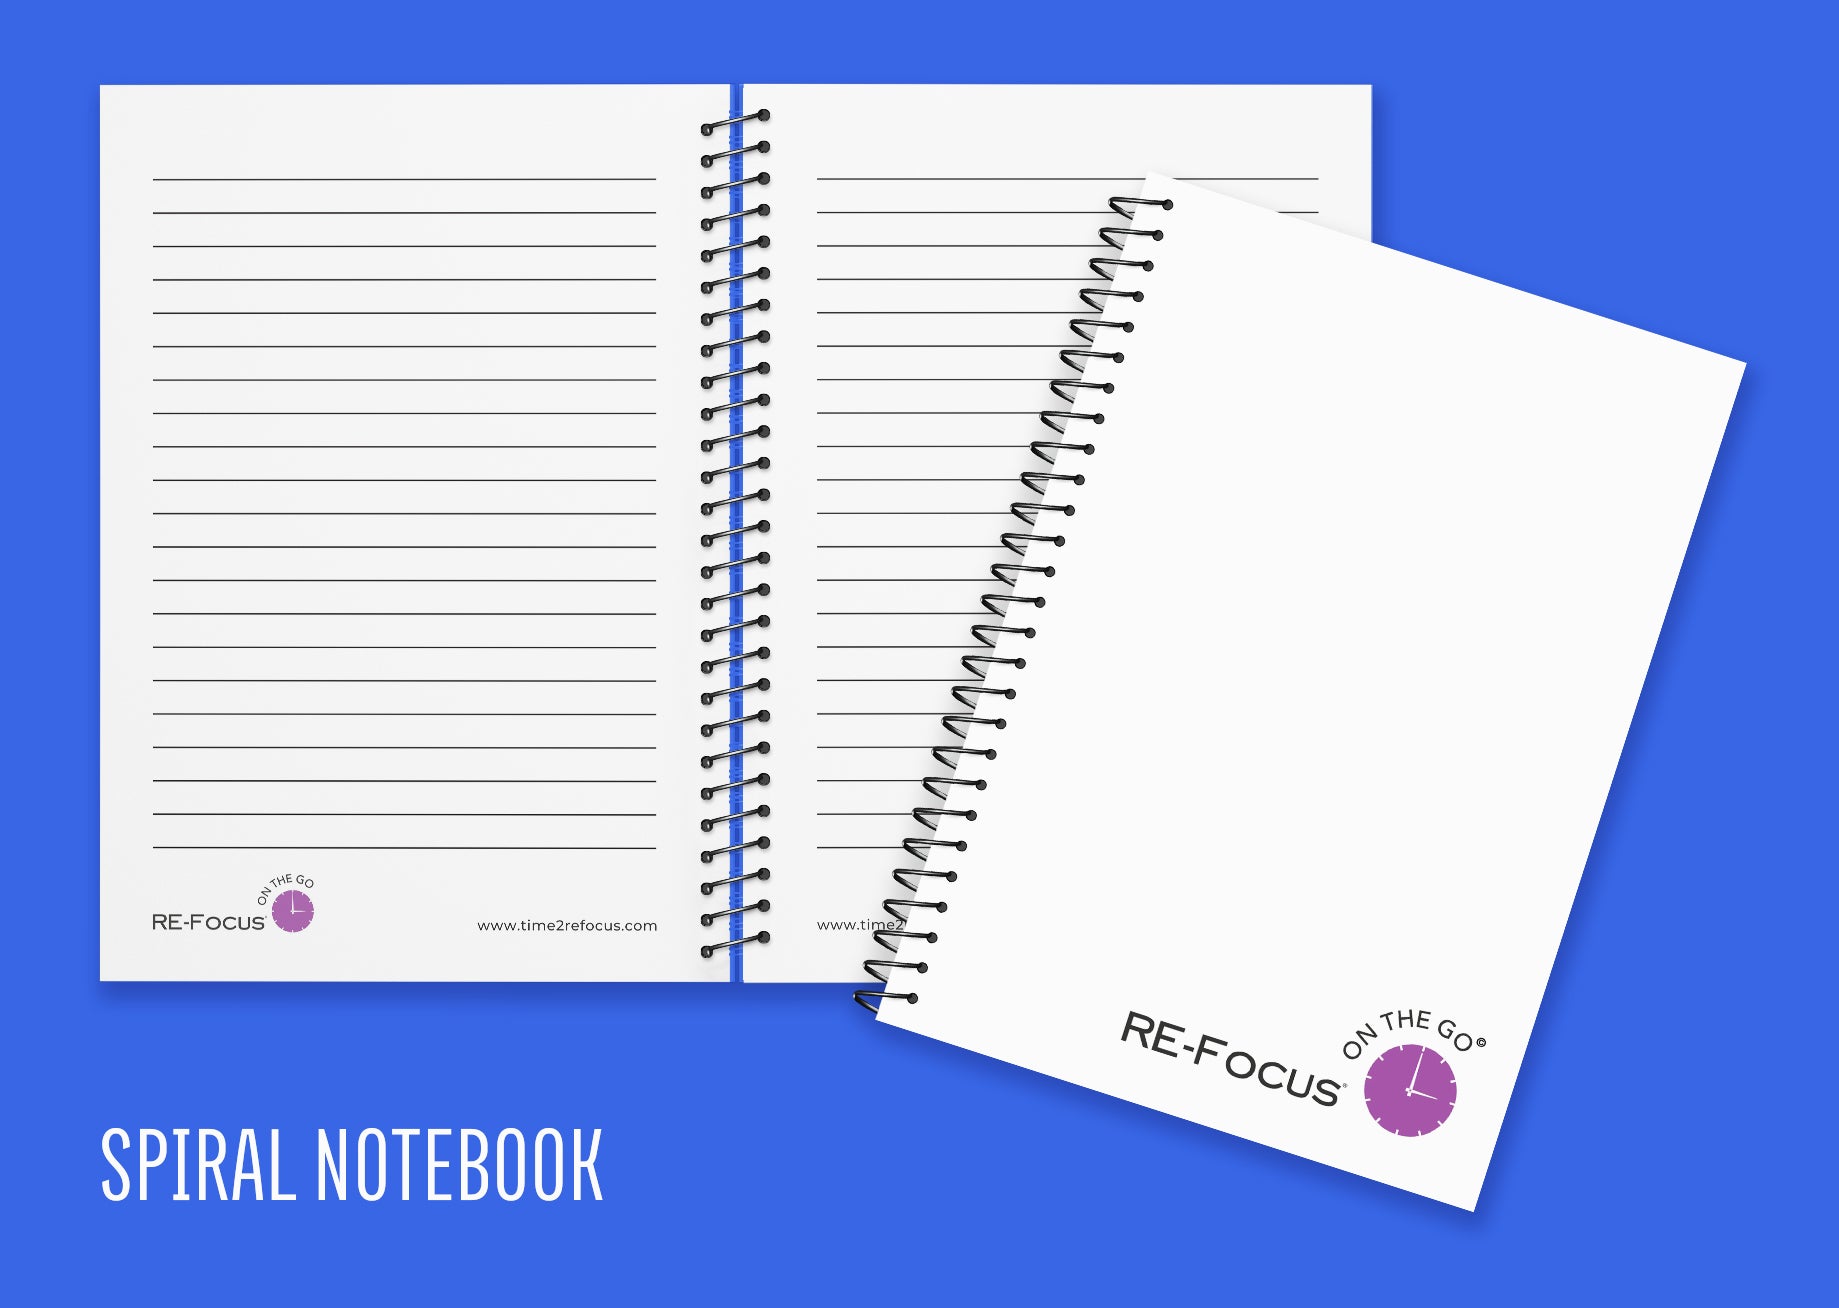 NEW!  RE-FOCUS ON THE GO NOTEBOOKS! IN BLACK OR WHITE